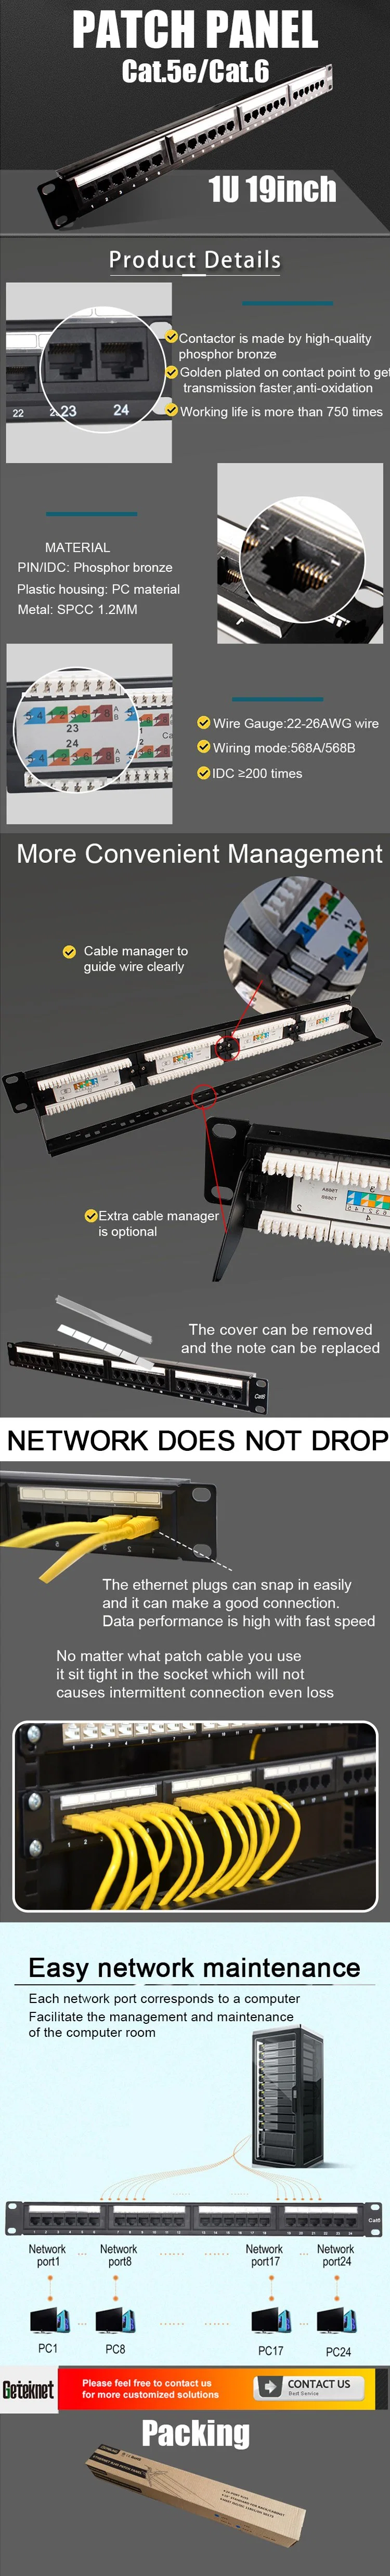 Gcabling Network Patch Panel Cable Management Network Patch Panel Excel Template Network Patch Panel Wall